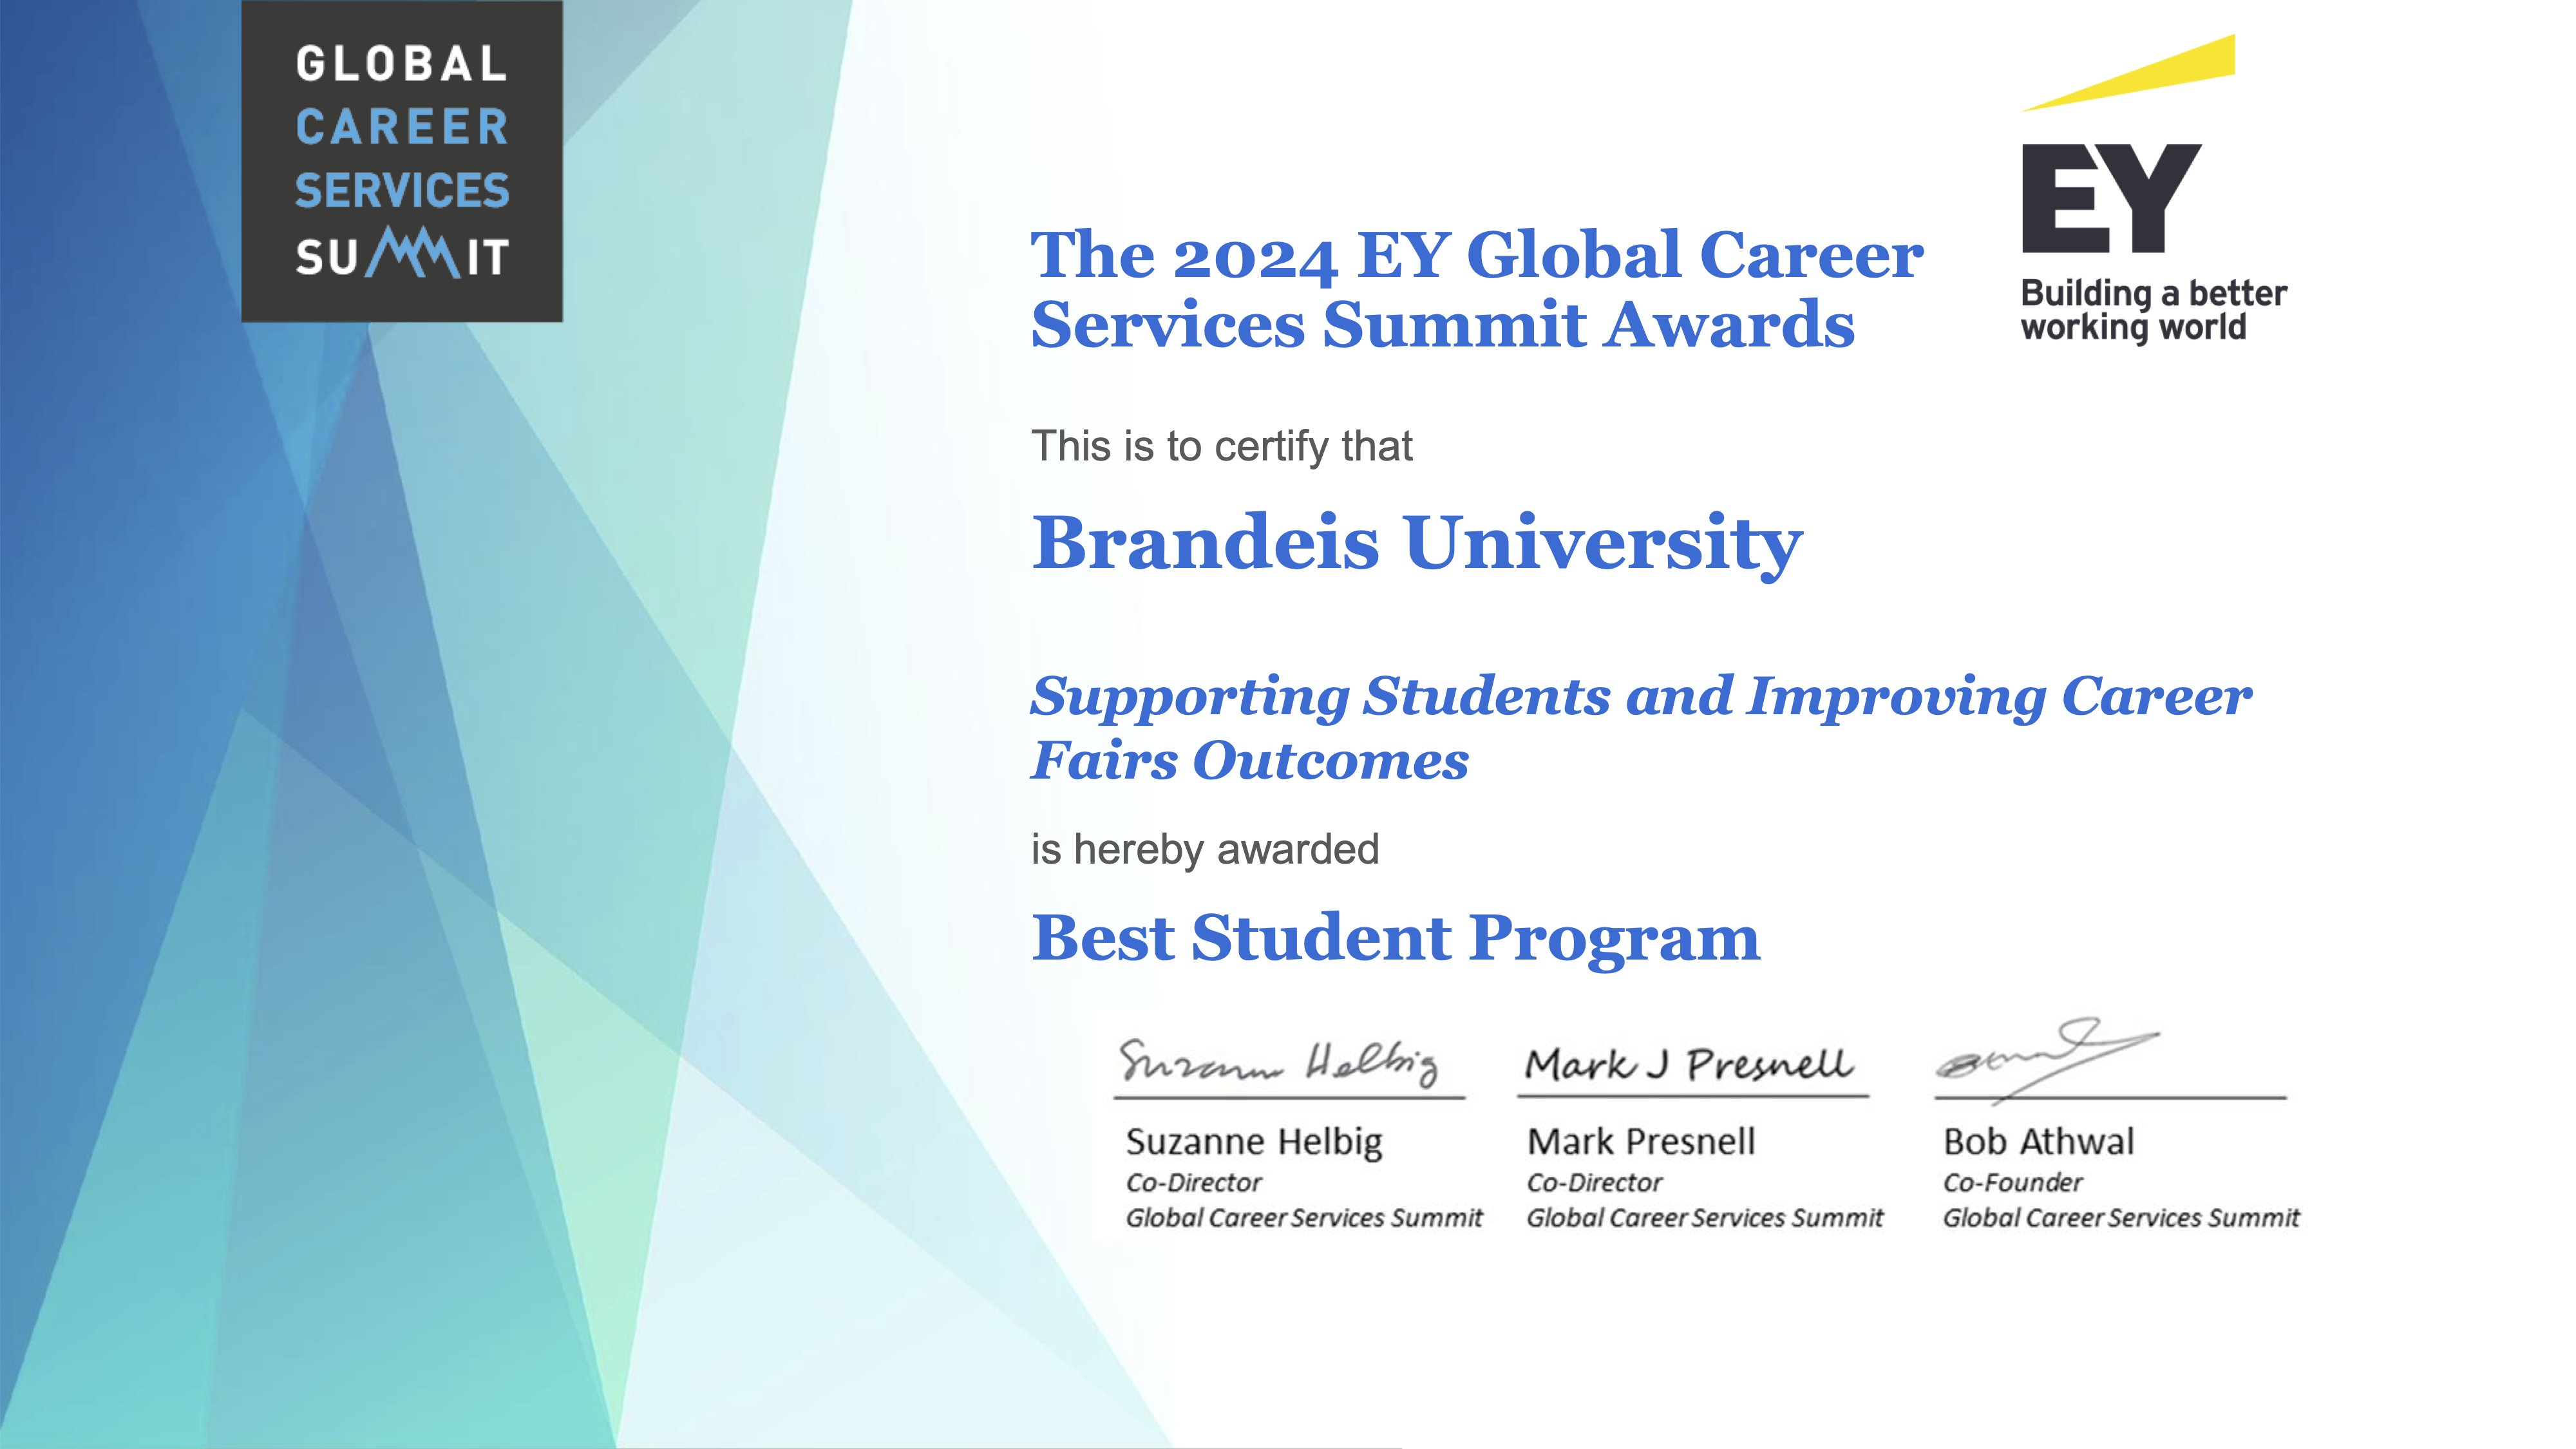 The 2024 EY Global Career Services Summit Awards certifies that Brandeis University is hereby awarded the Best Student Program award for supporting students and improving career fair outcomes.